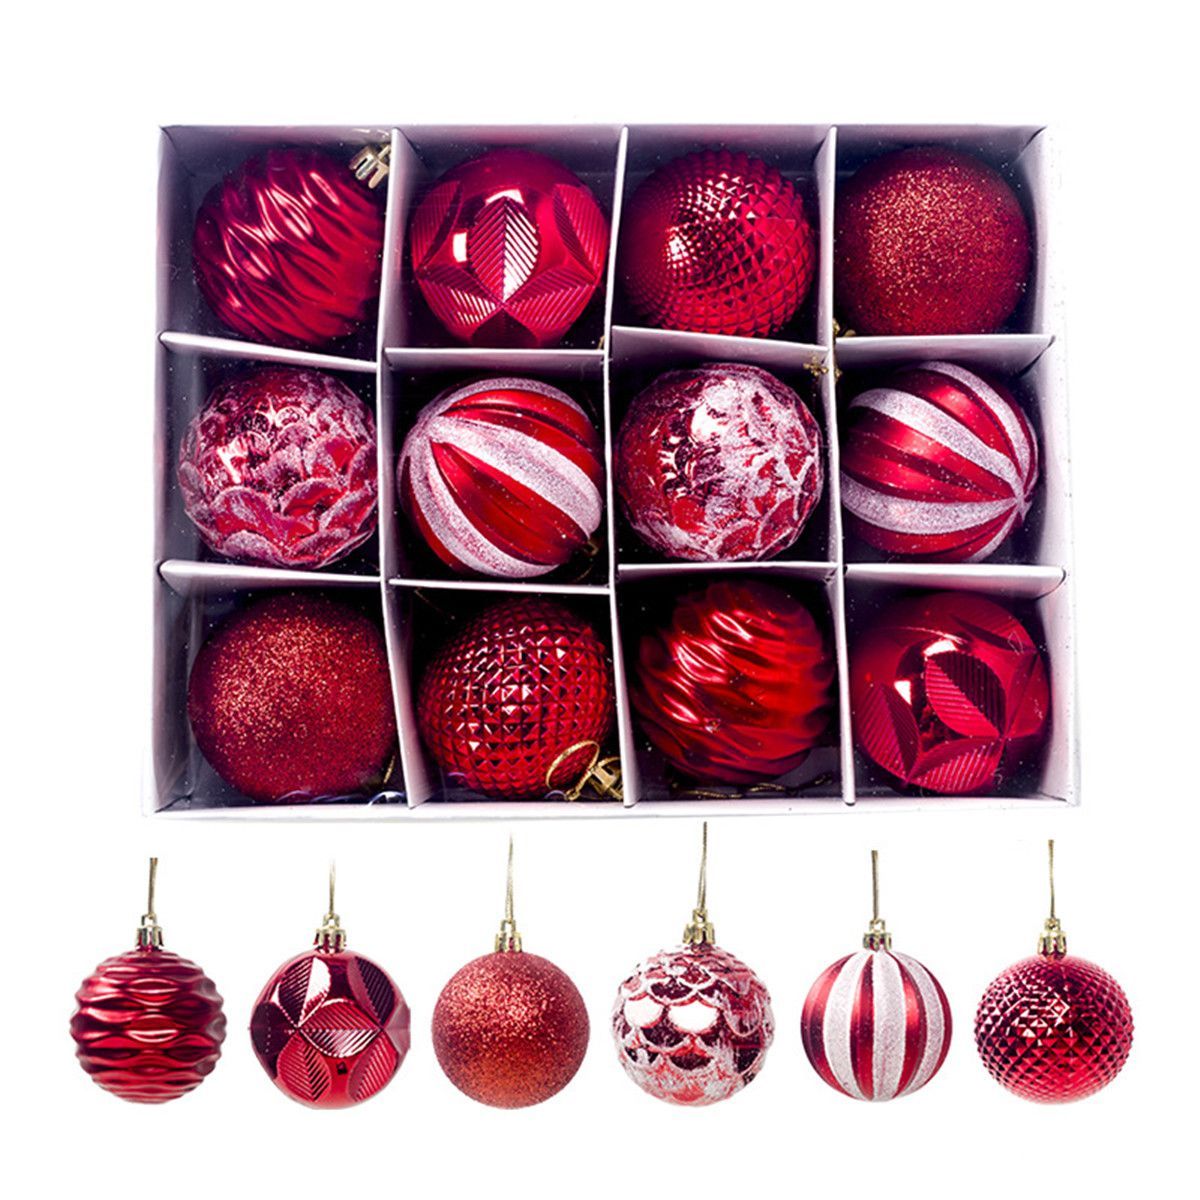 12Pcs-50mm-Christmas-Tree-Ball-Baubles-Decoration-Xmas-Hanging-Party-Ornaments-1592958